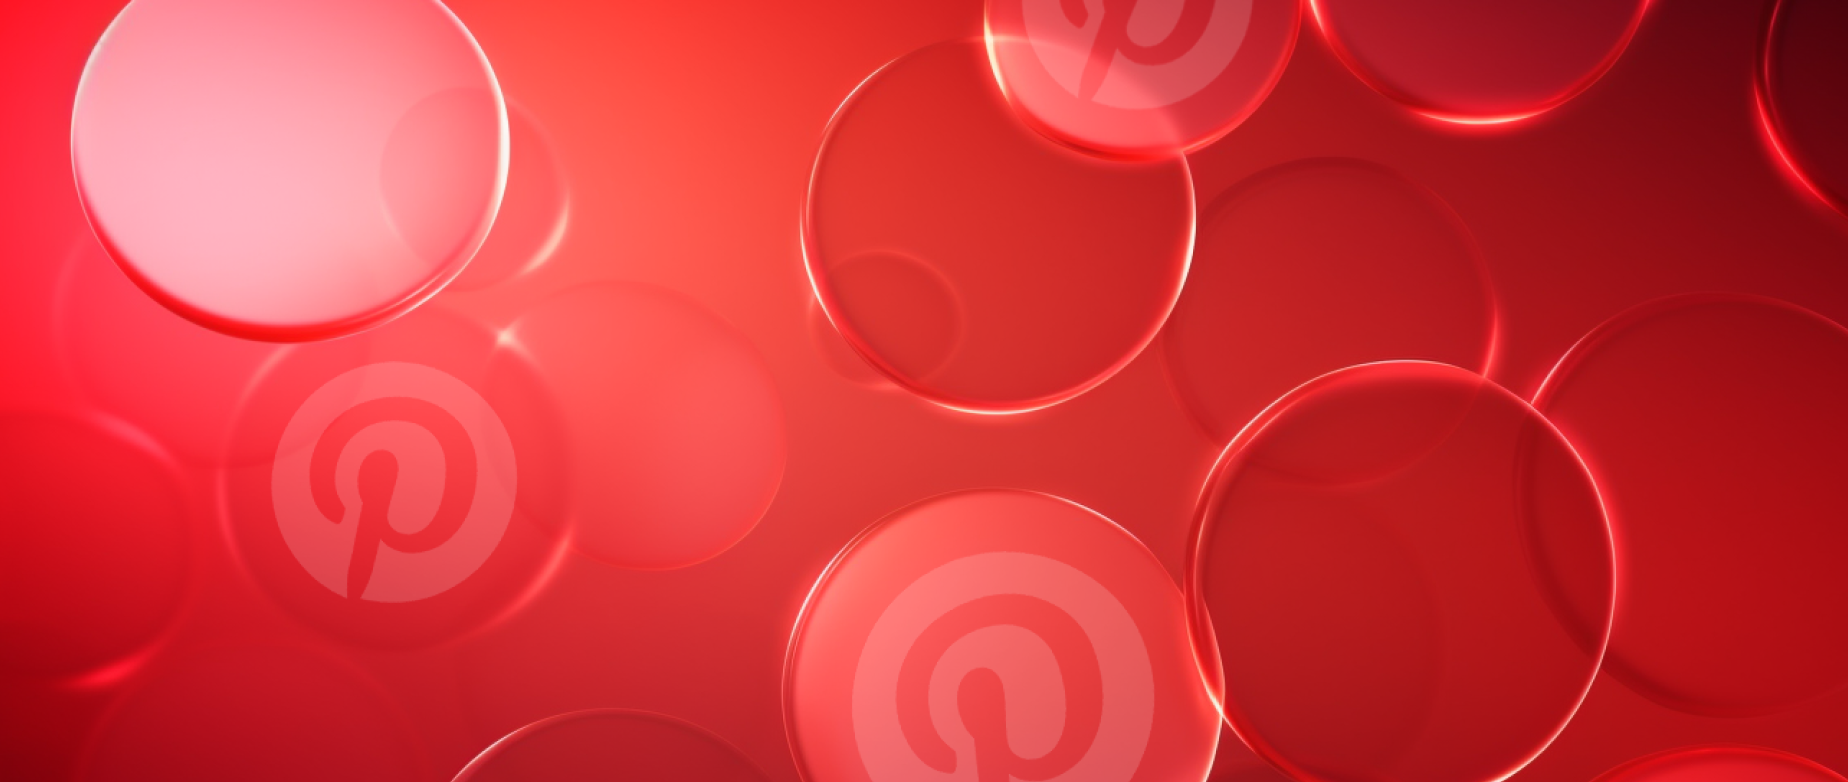 red circles against a red background with the Pinterest logo on them: pinterest affiliate marketing